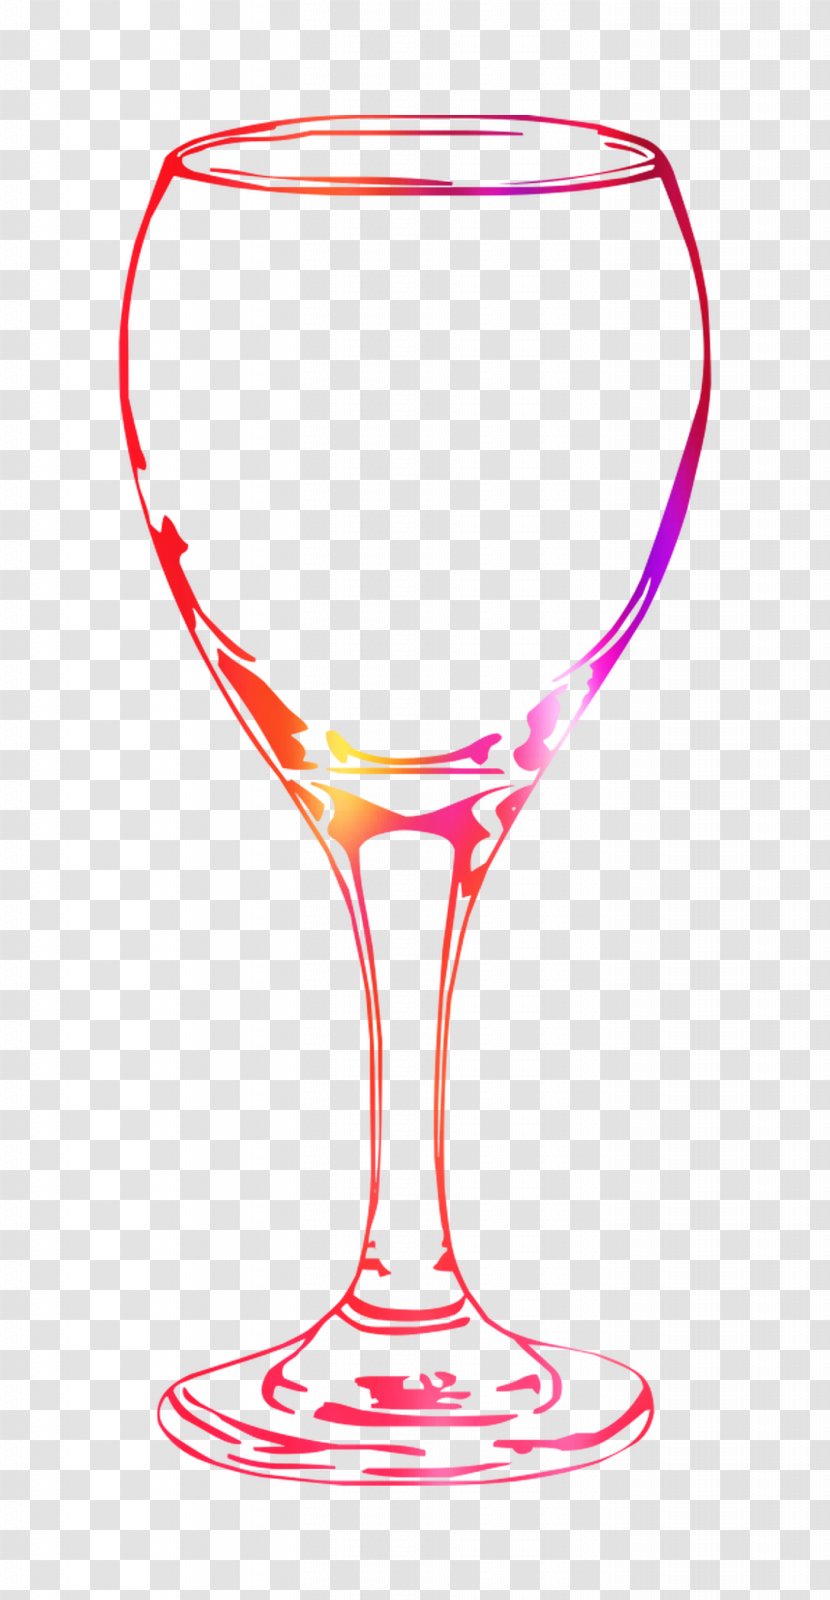 Wine Glass Pink Lady Champagne Martini - Cocktail - Drink Transparent PNG